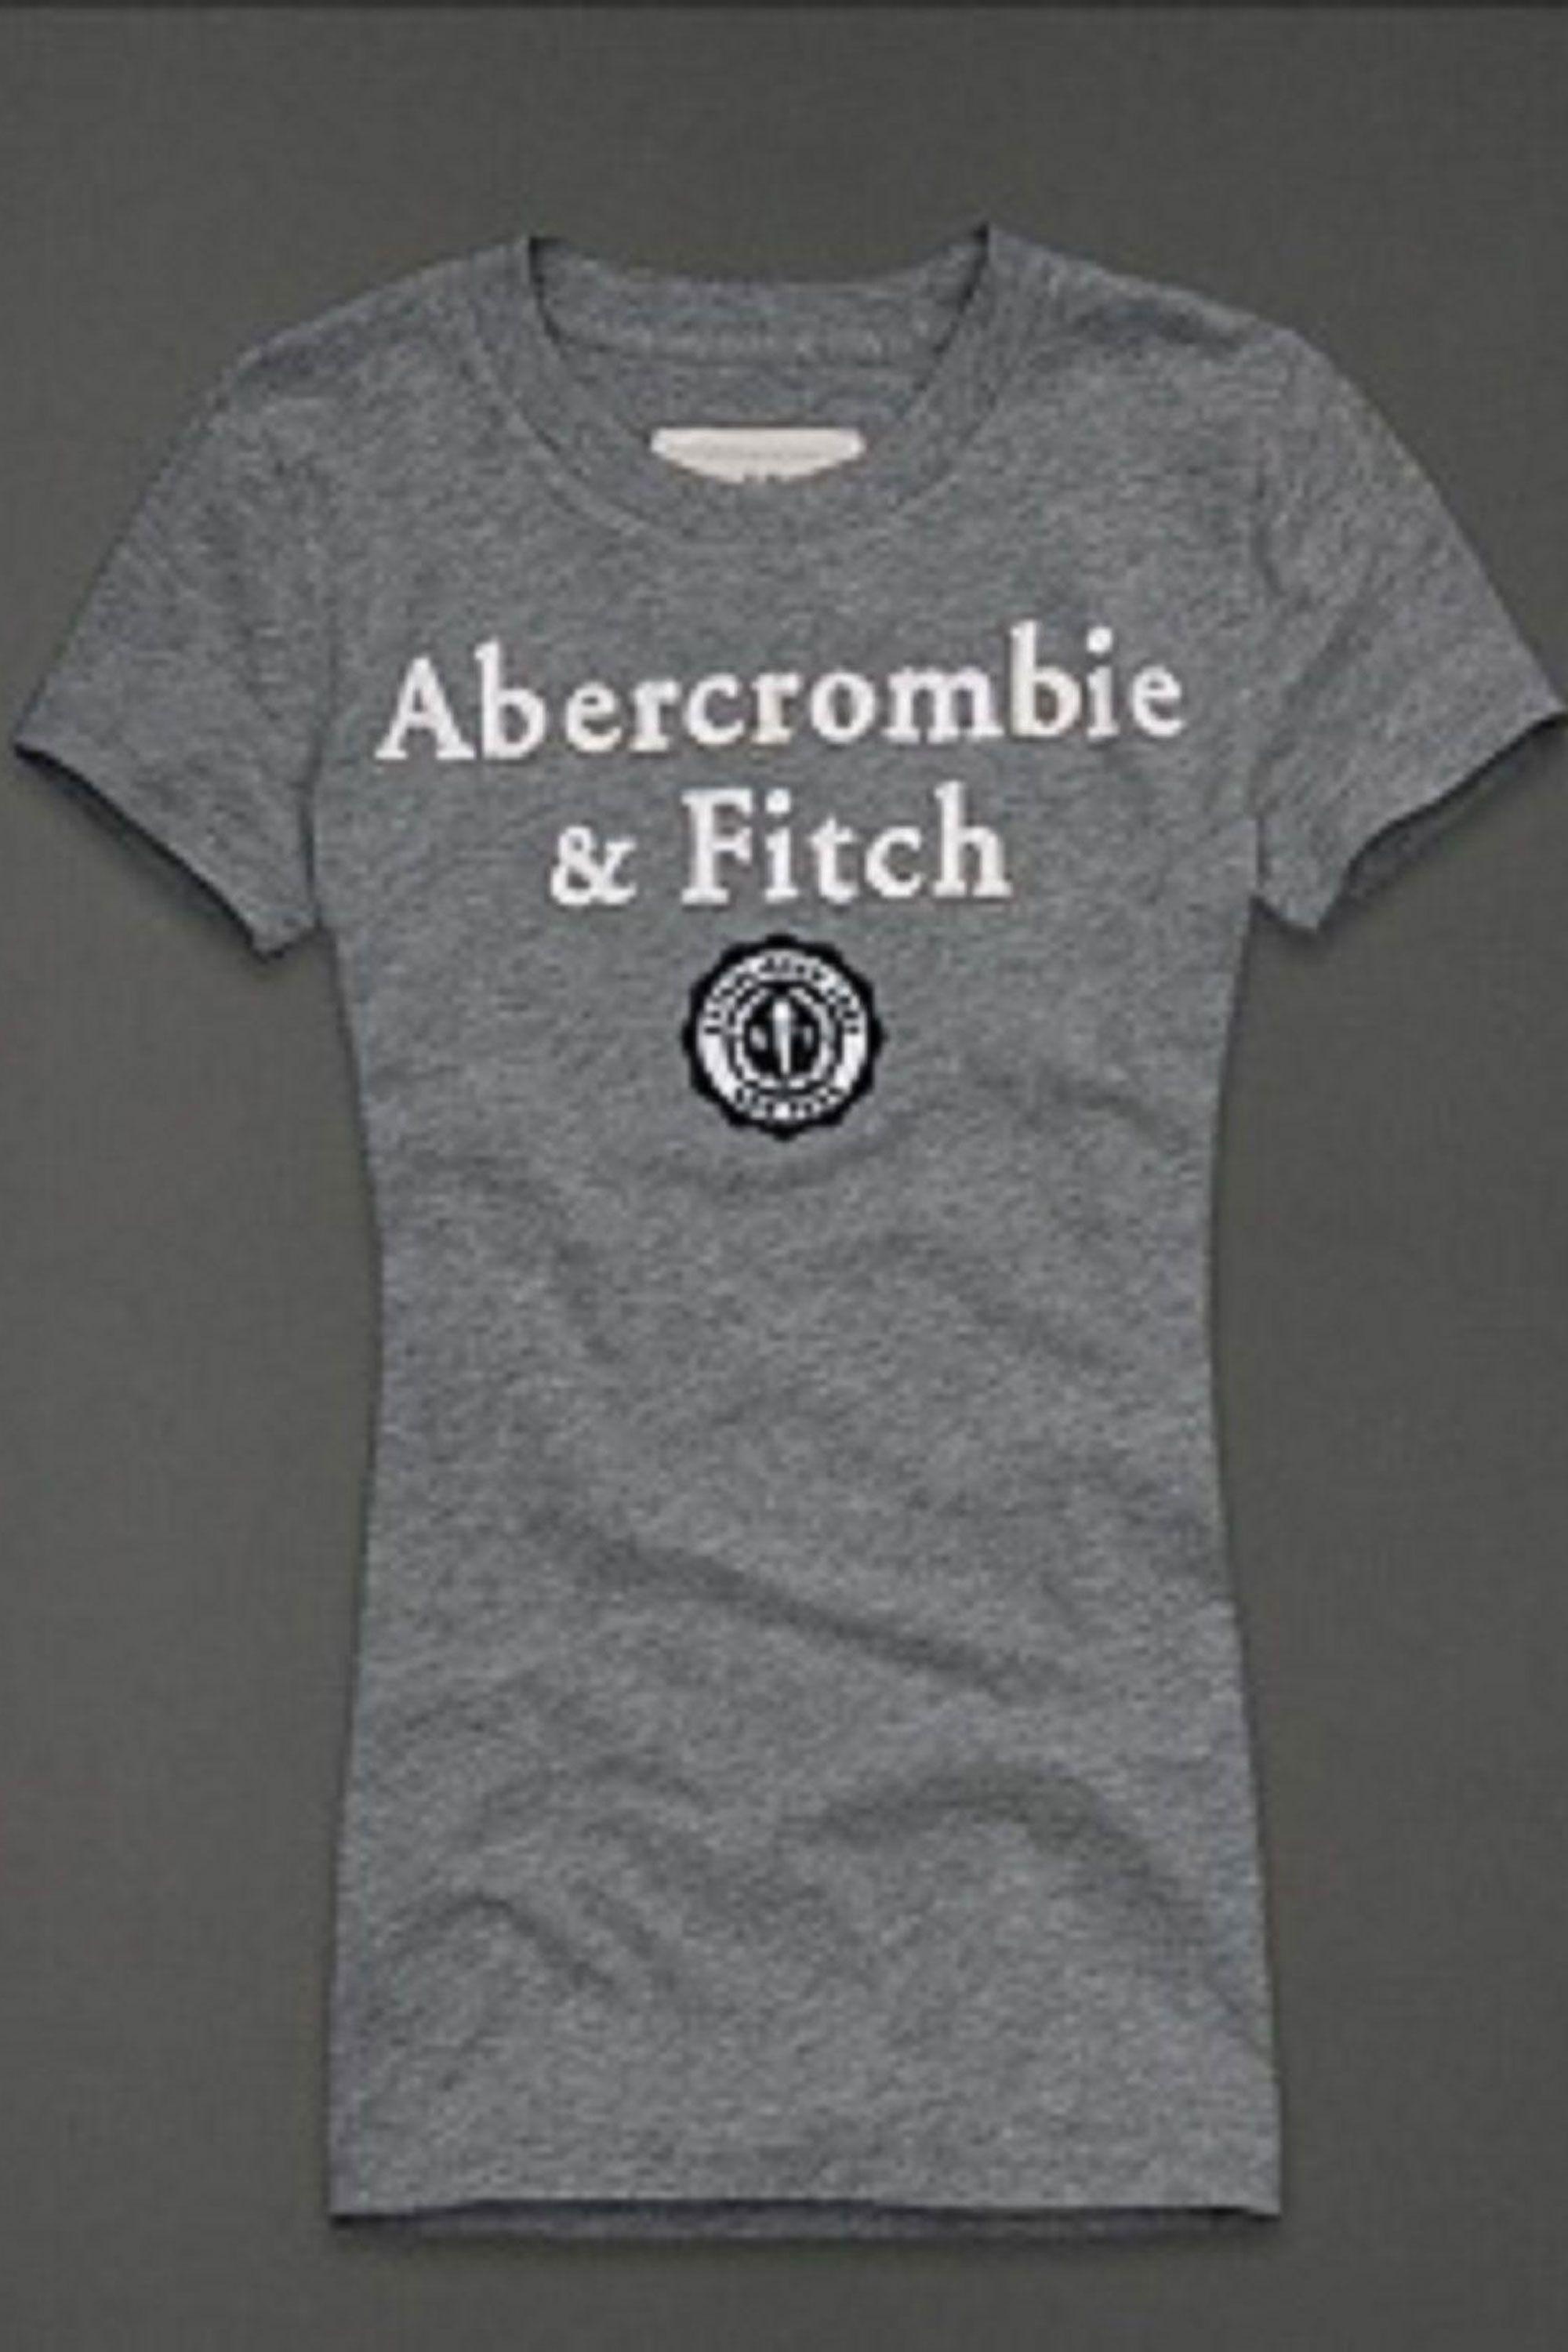 Abercrombie Clothing Logo - 21 Things From Abercrombie & Fitch You Used to Be Obsessed With